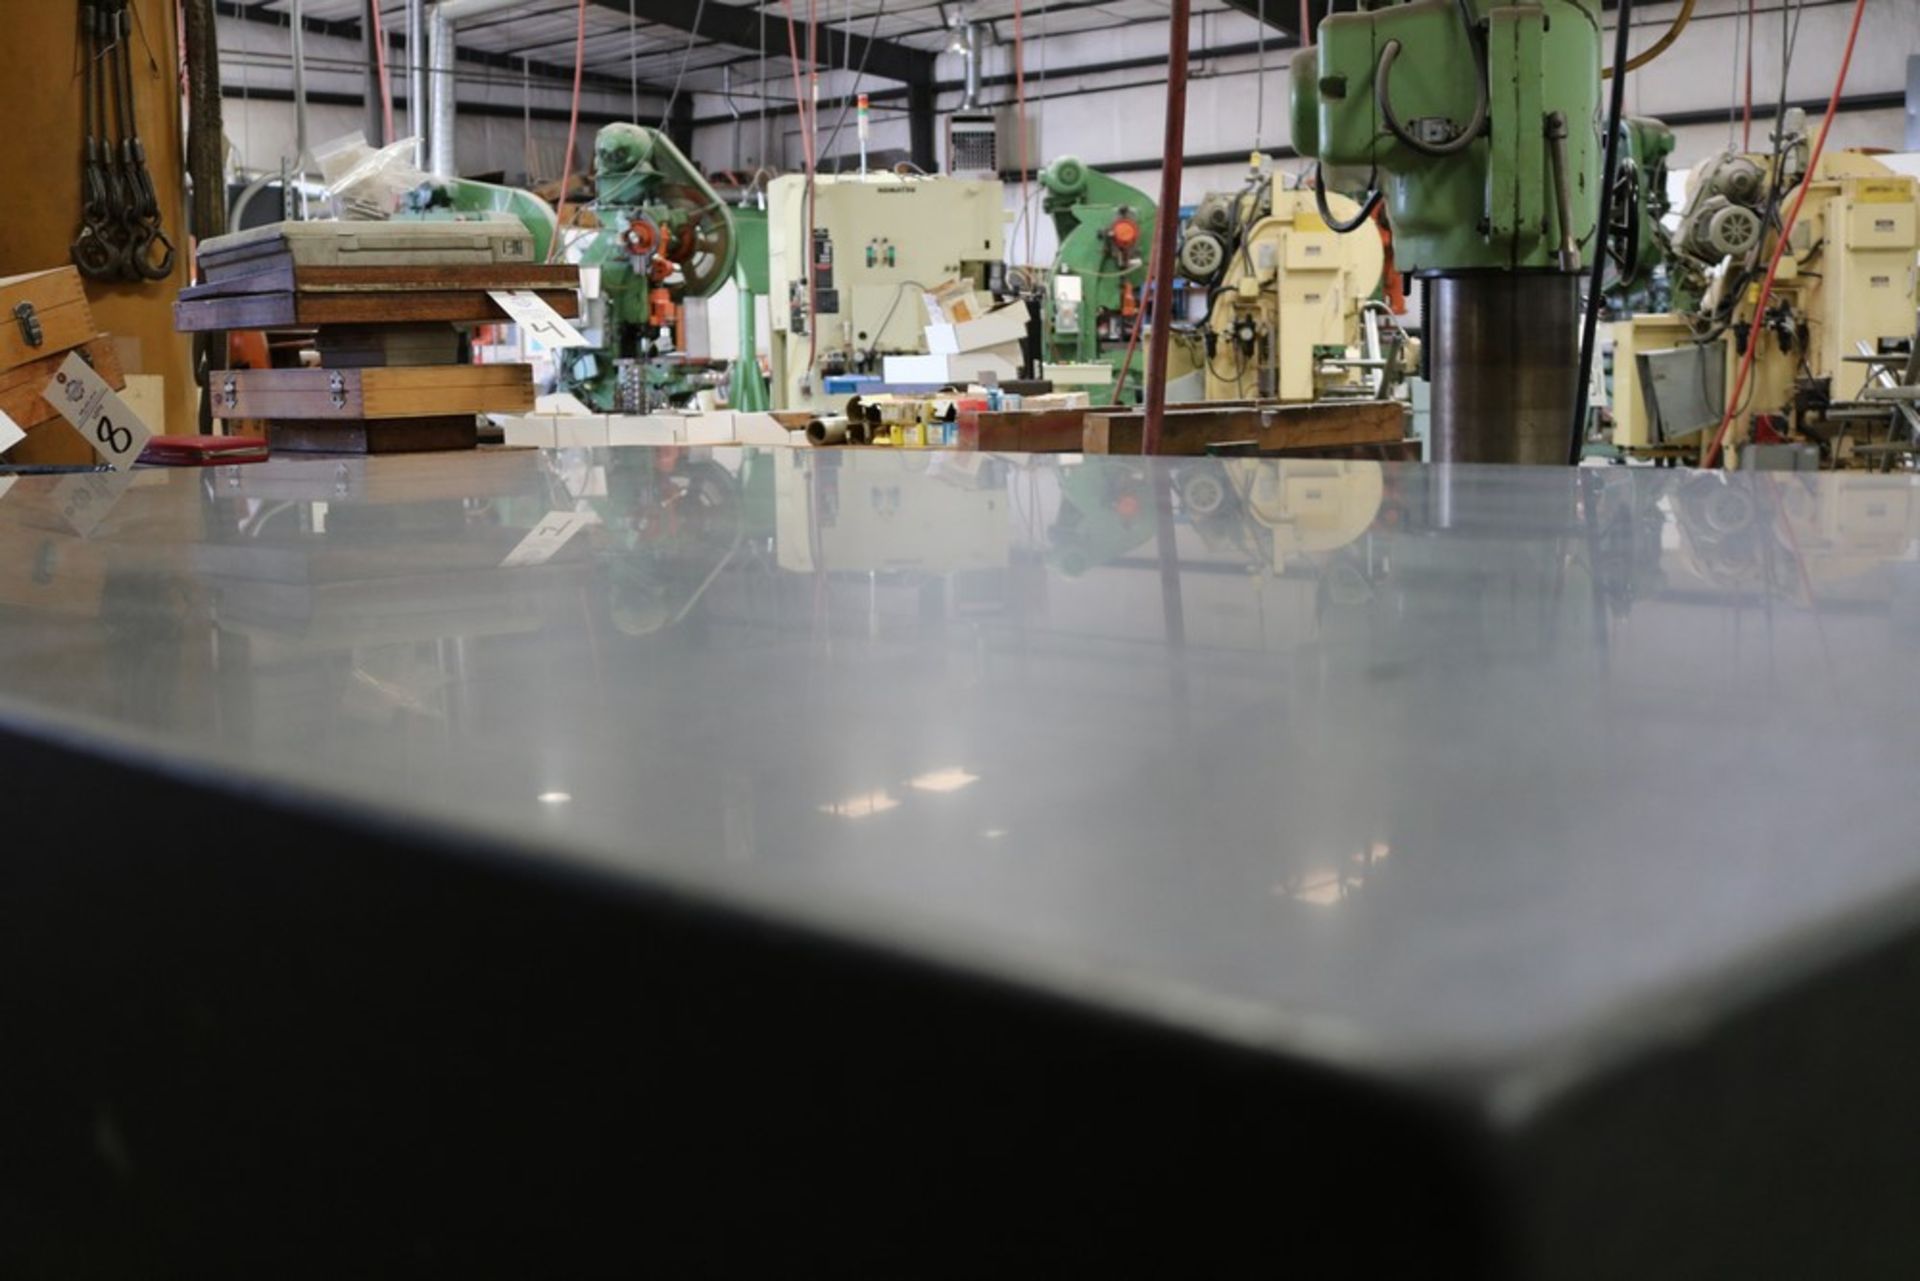 Black Granite Surface Inspection Table 4' x 6' x 10", Table Grade A, Next Inspection Required 5-5- - Image 3 of 4